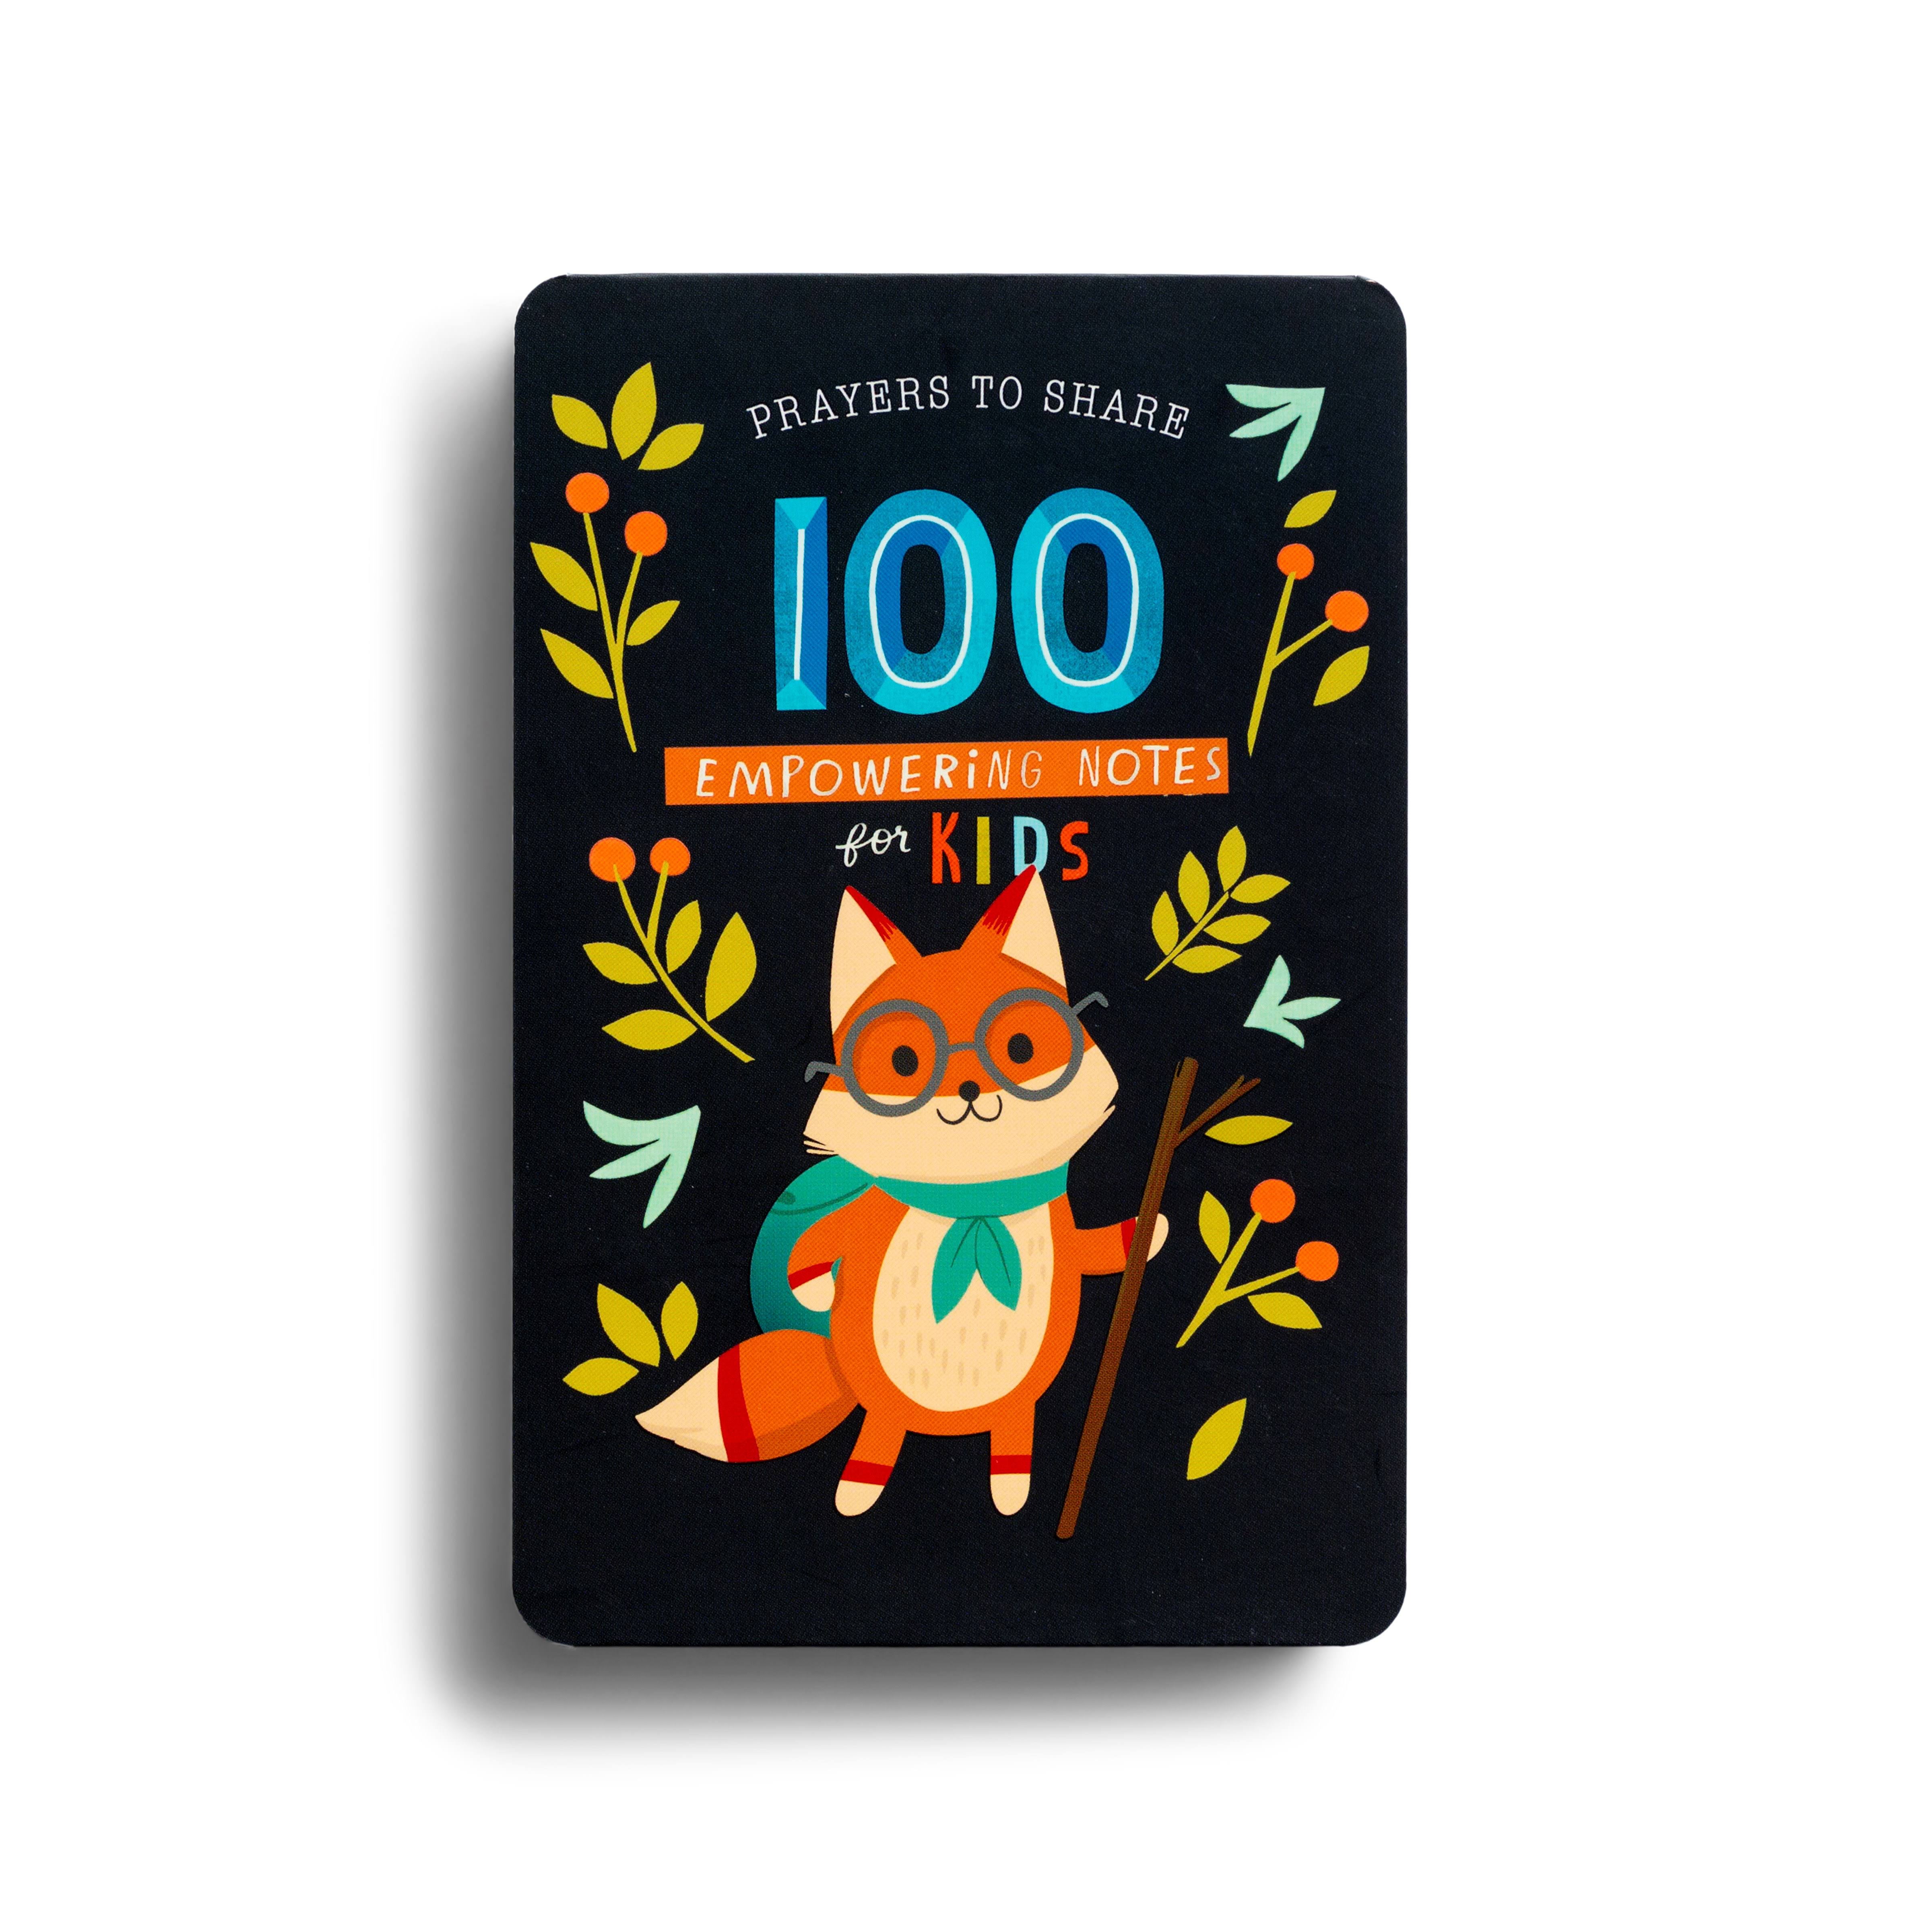 Prayers to Share 100 Empowering Notes for Kids [Book]